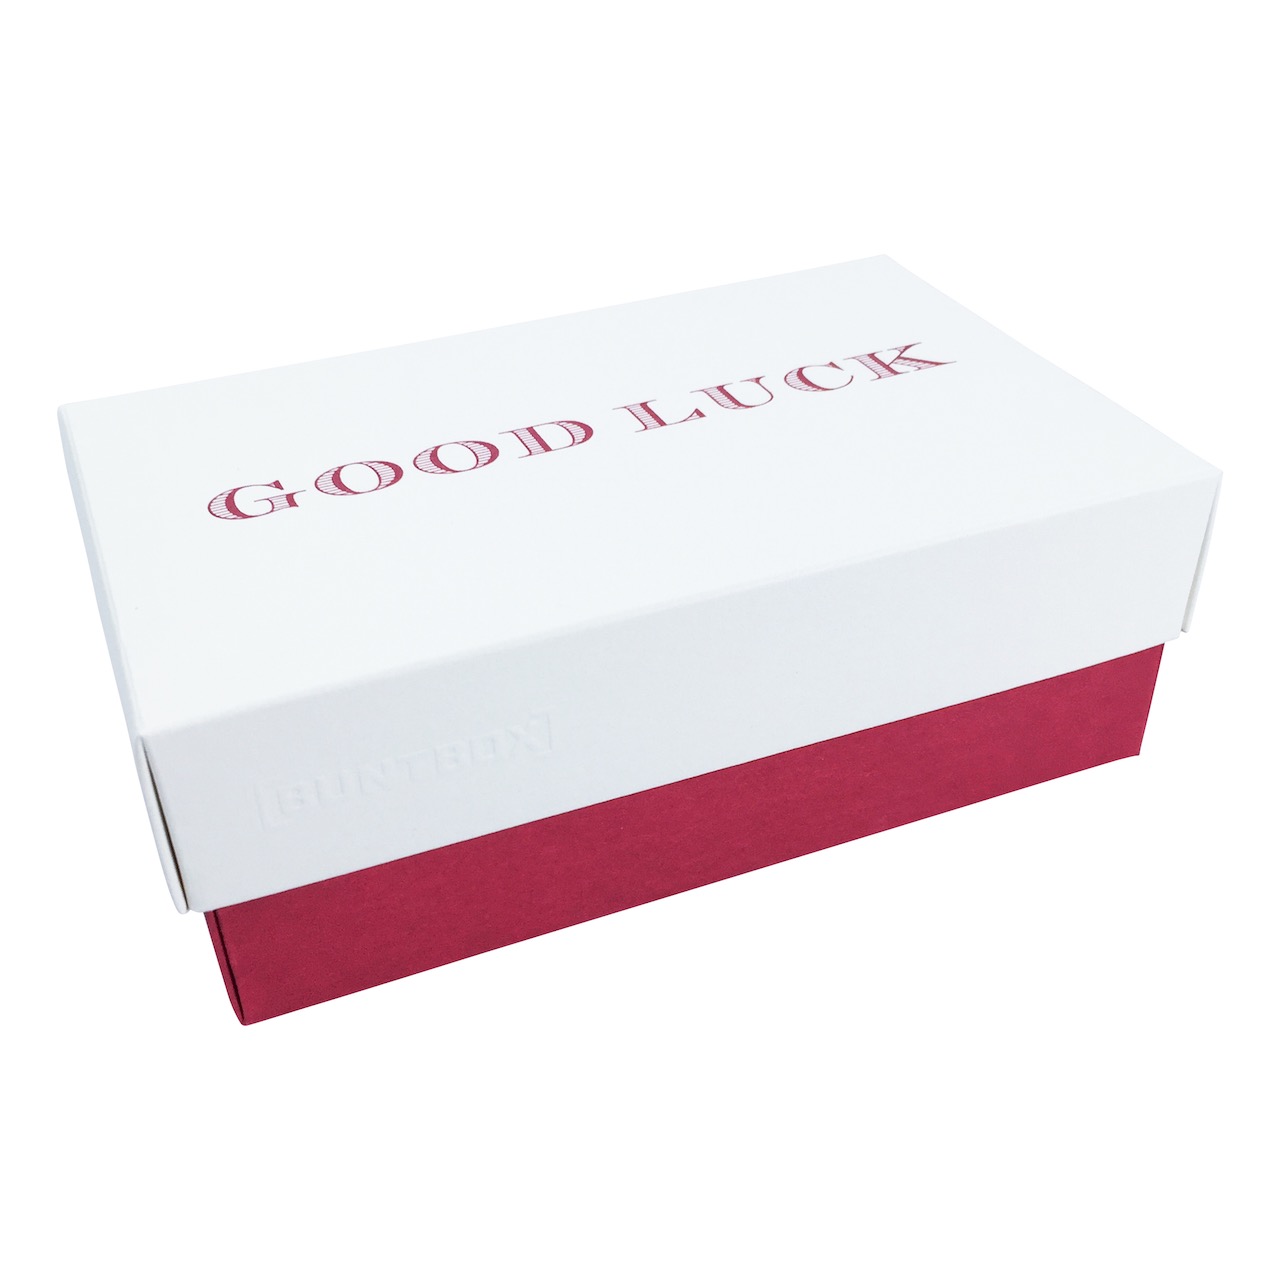 Fine Paper Edition Buntbox  Champagne - Bordeaux 'Merry Christmas' - Red